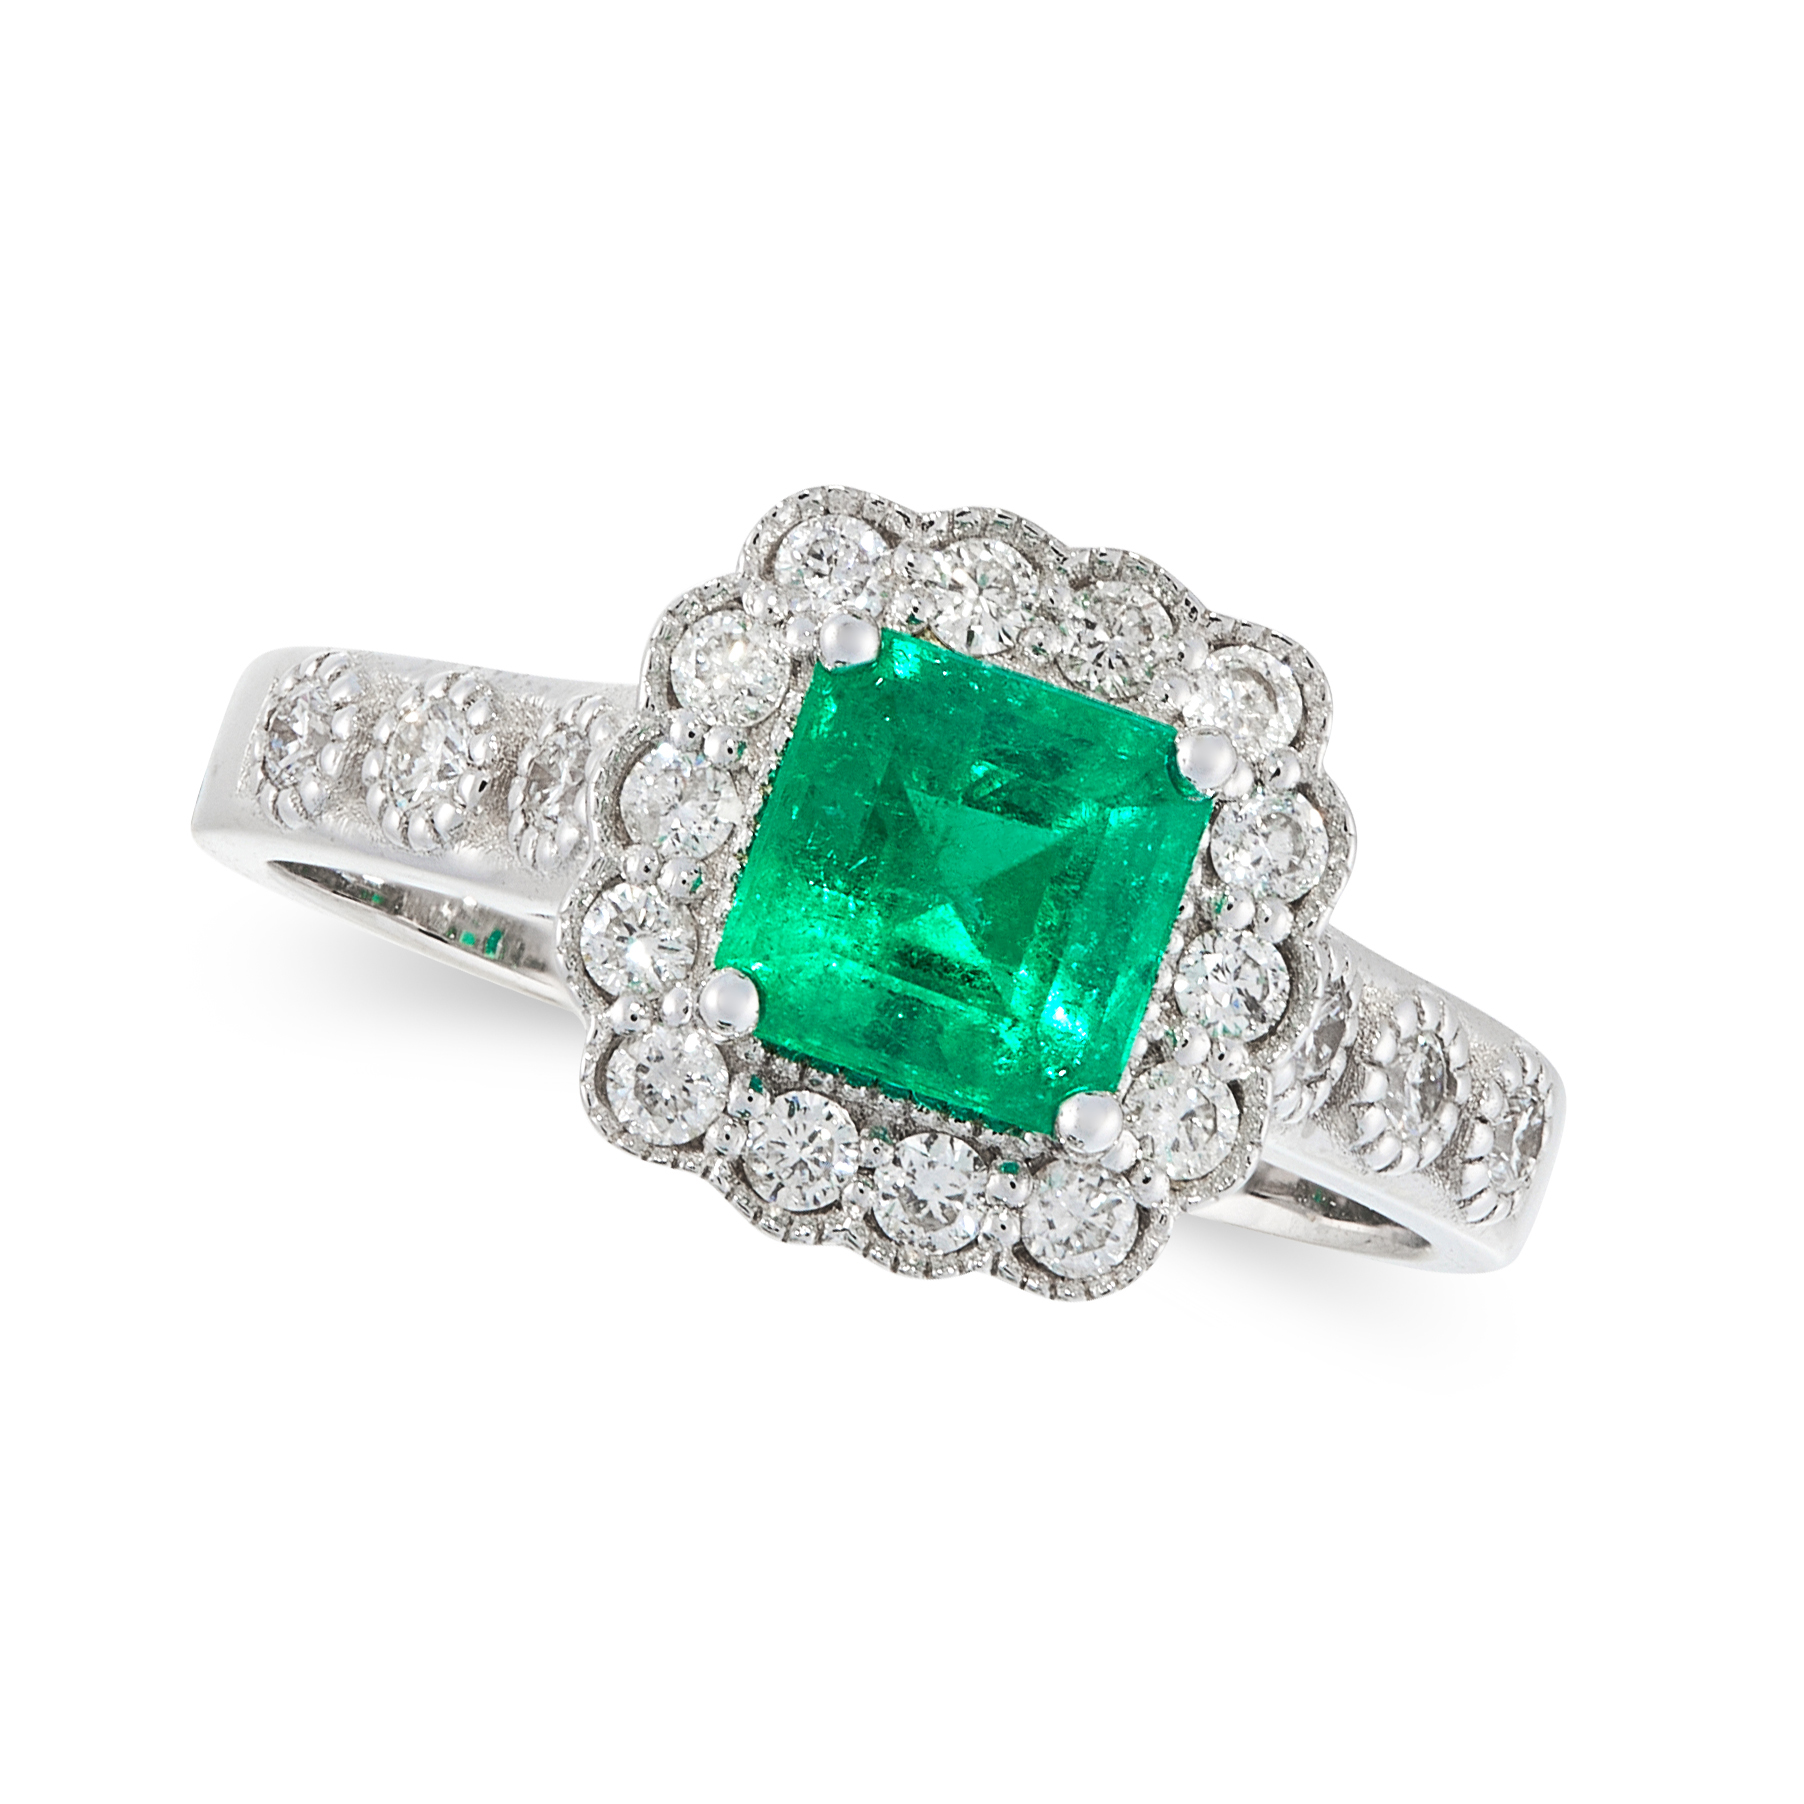 A COLOMBIAN EMERALD AND DIAMOND DRESS RING in 18ct white gold, set with an emerald cut emerald of